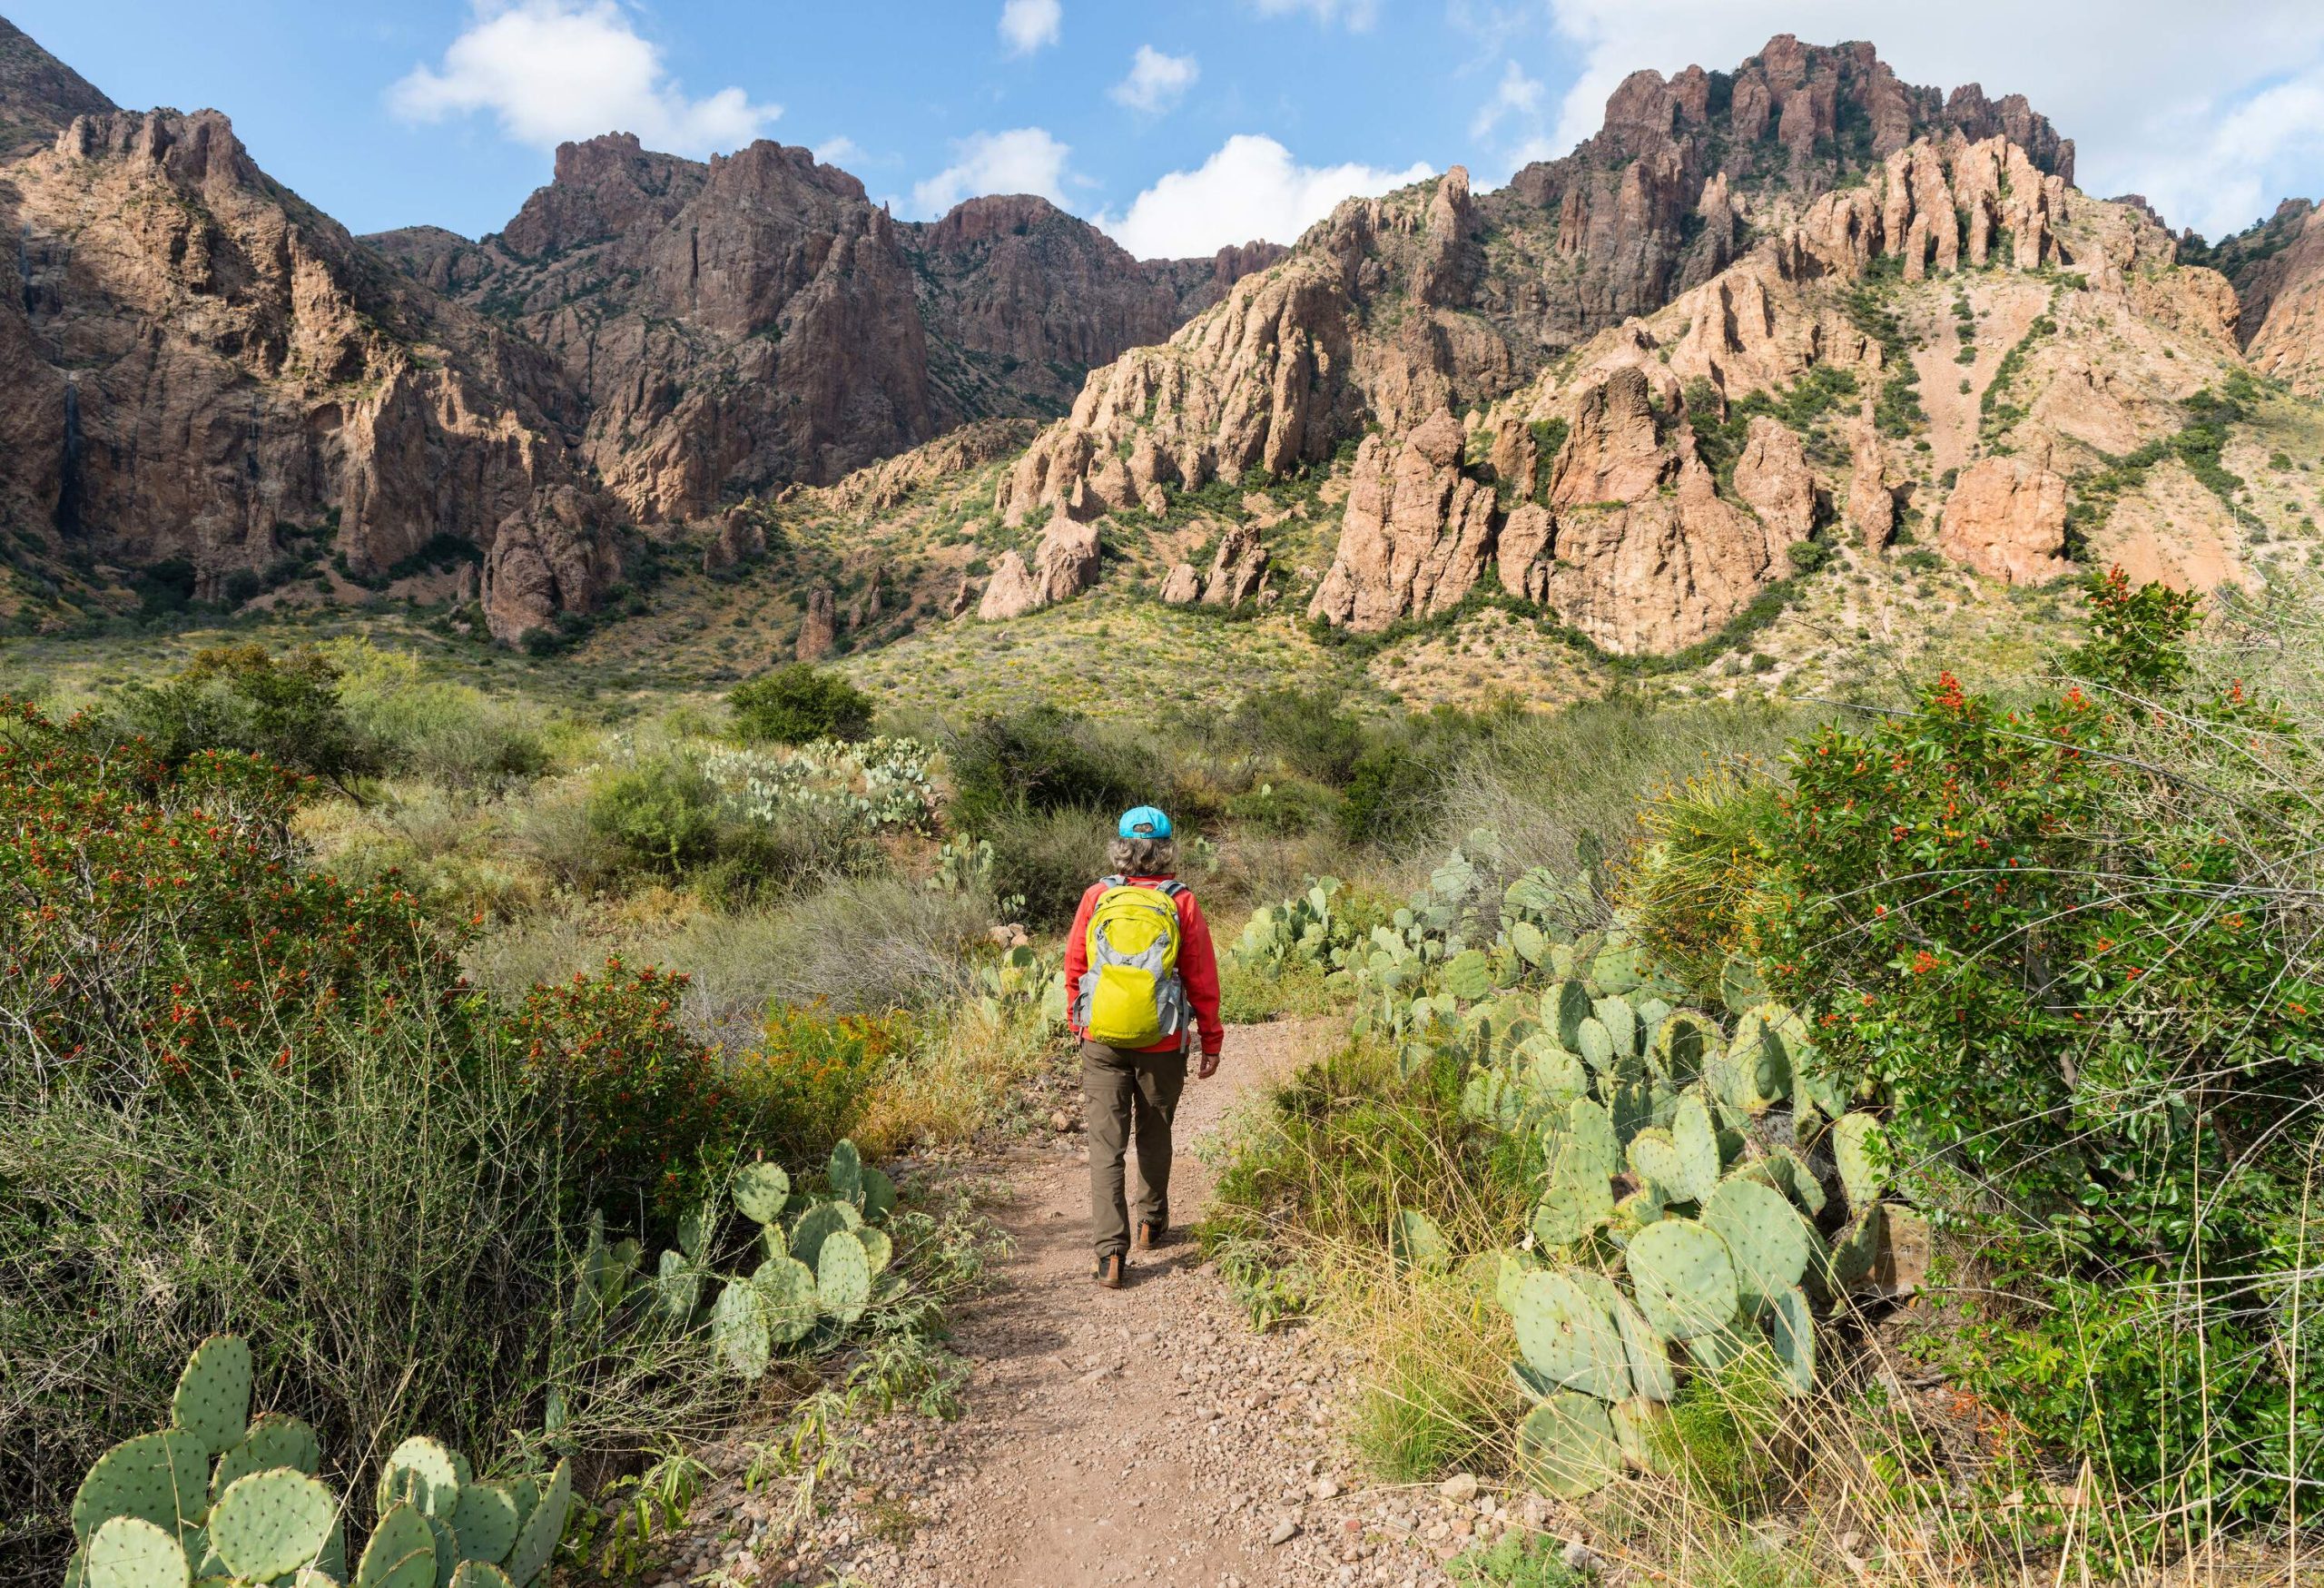 A hiker carries a yellow backpack and traverses a trail across desert plants towards the rugged mountains in the distance.